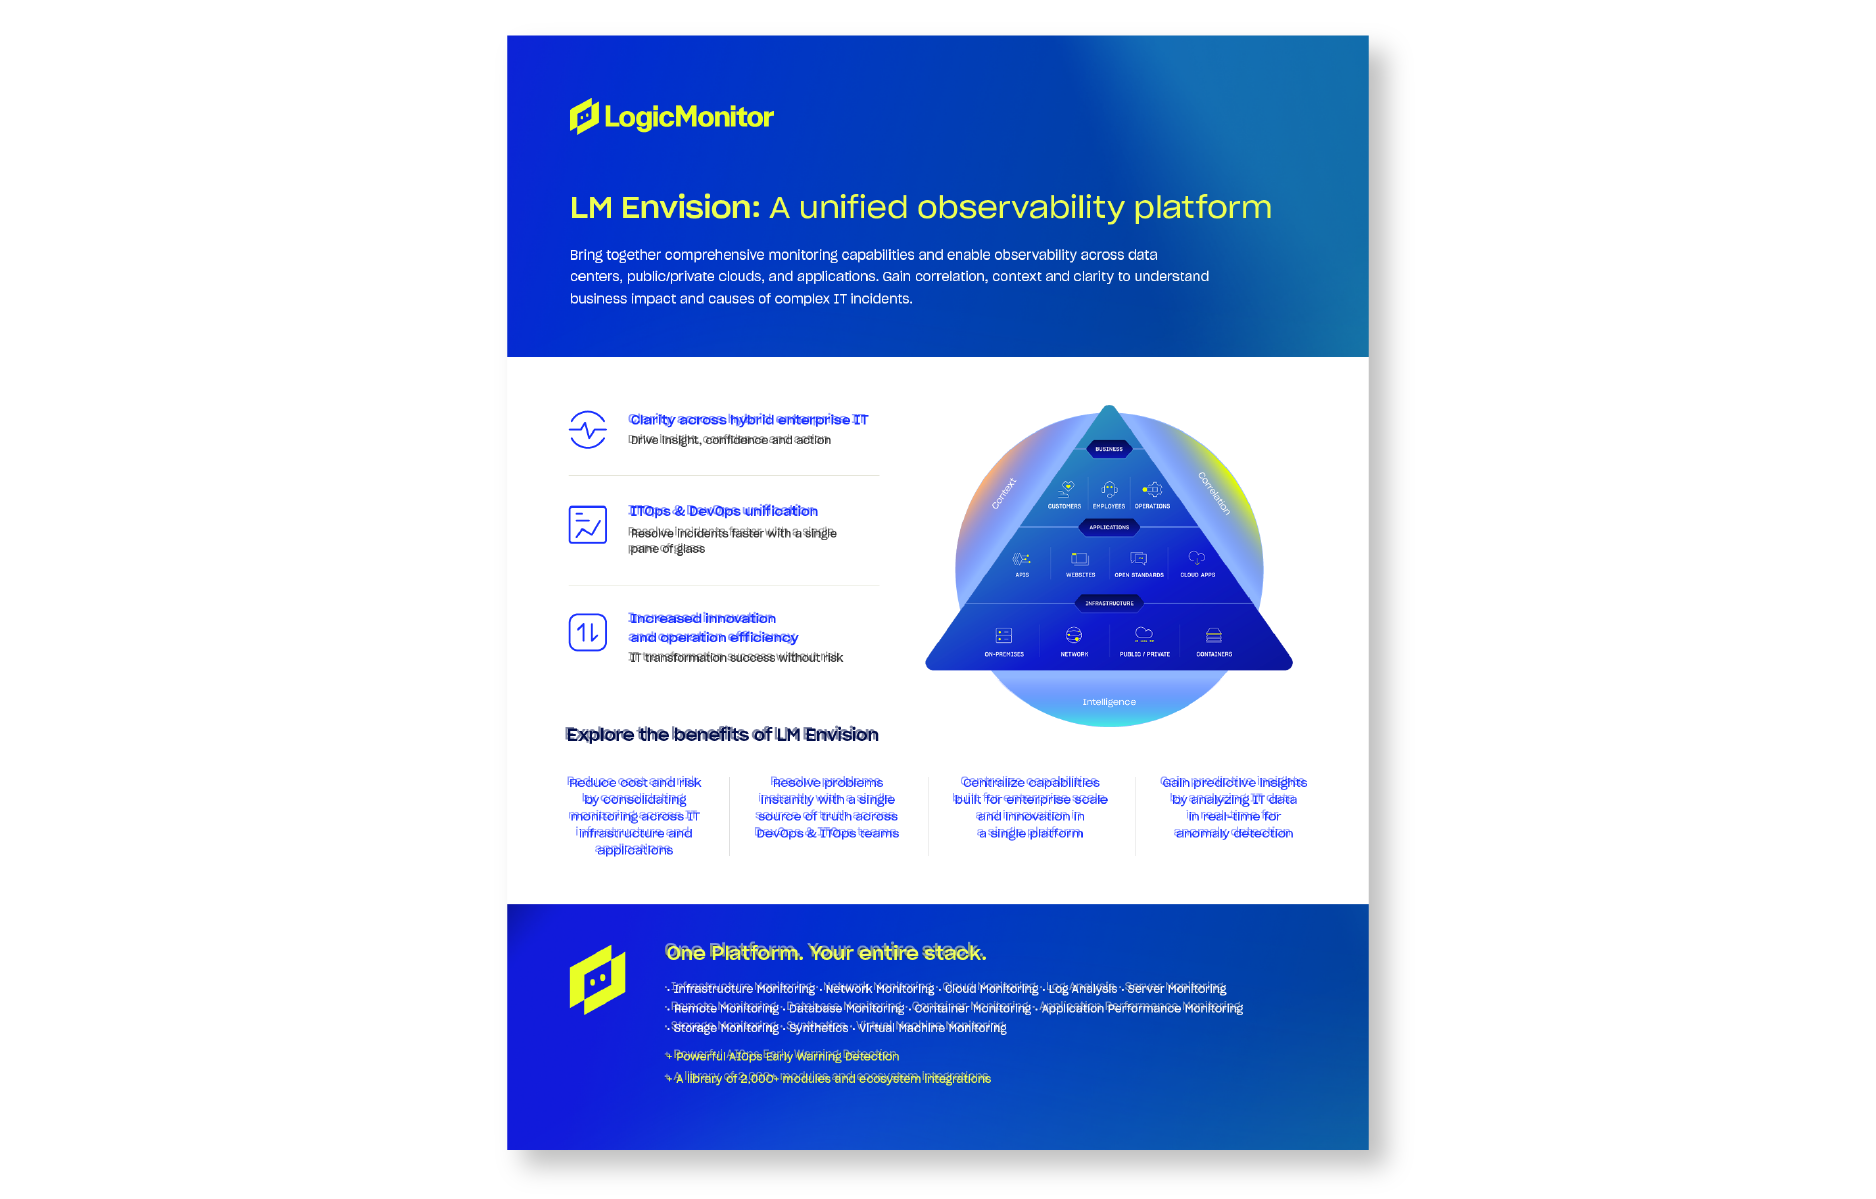 LM Envision: a unified observability platform